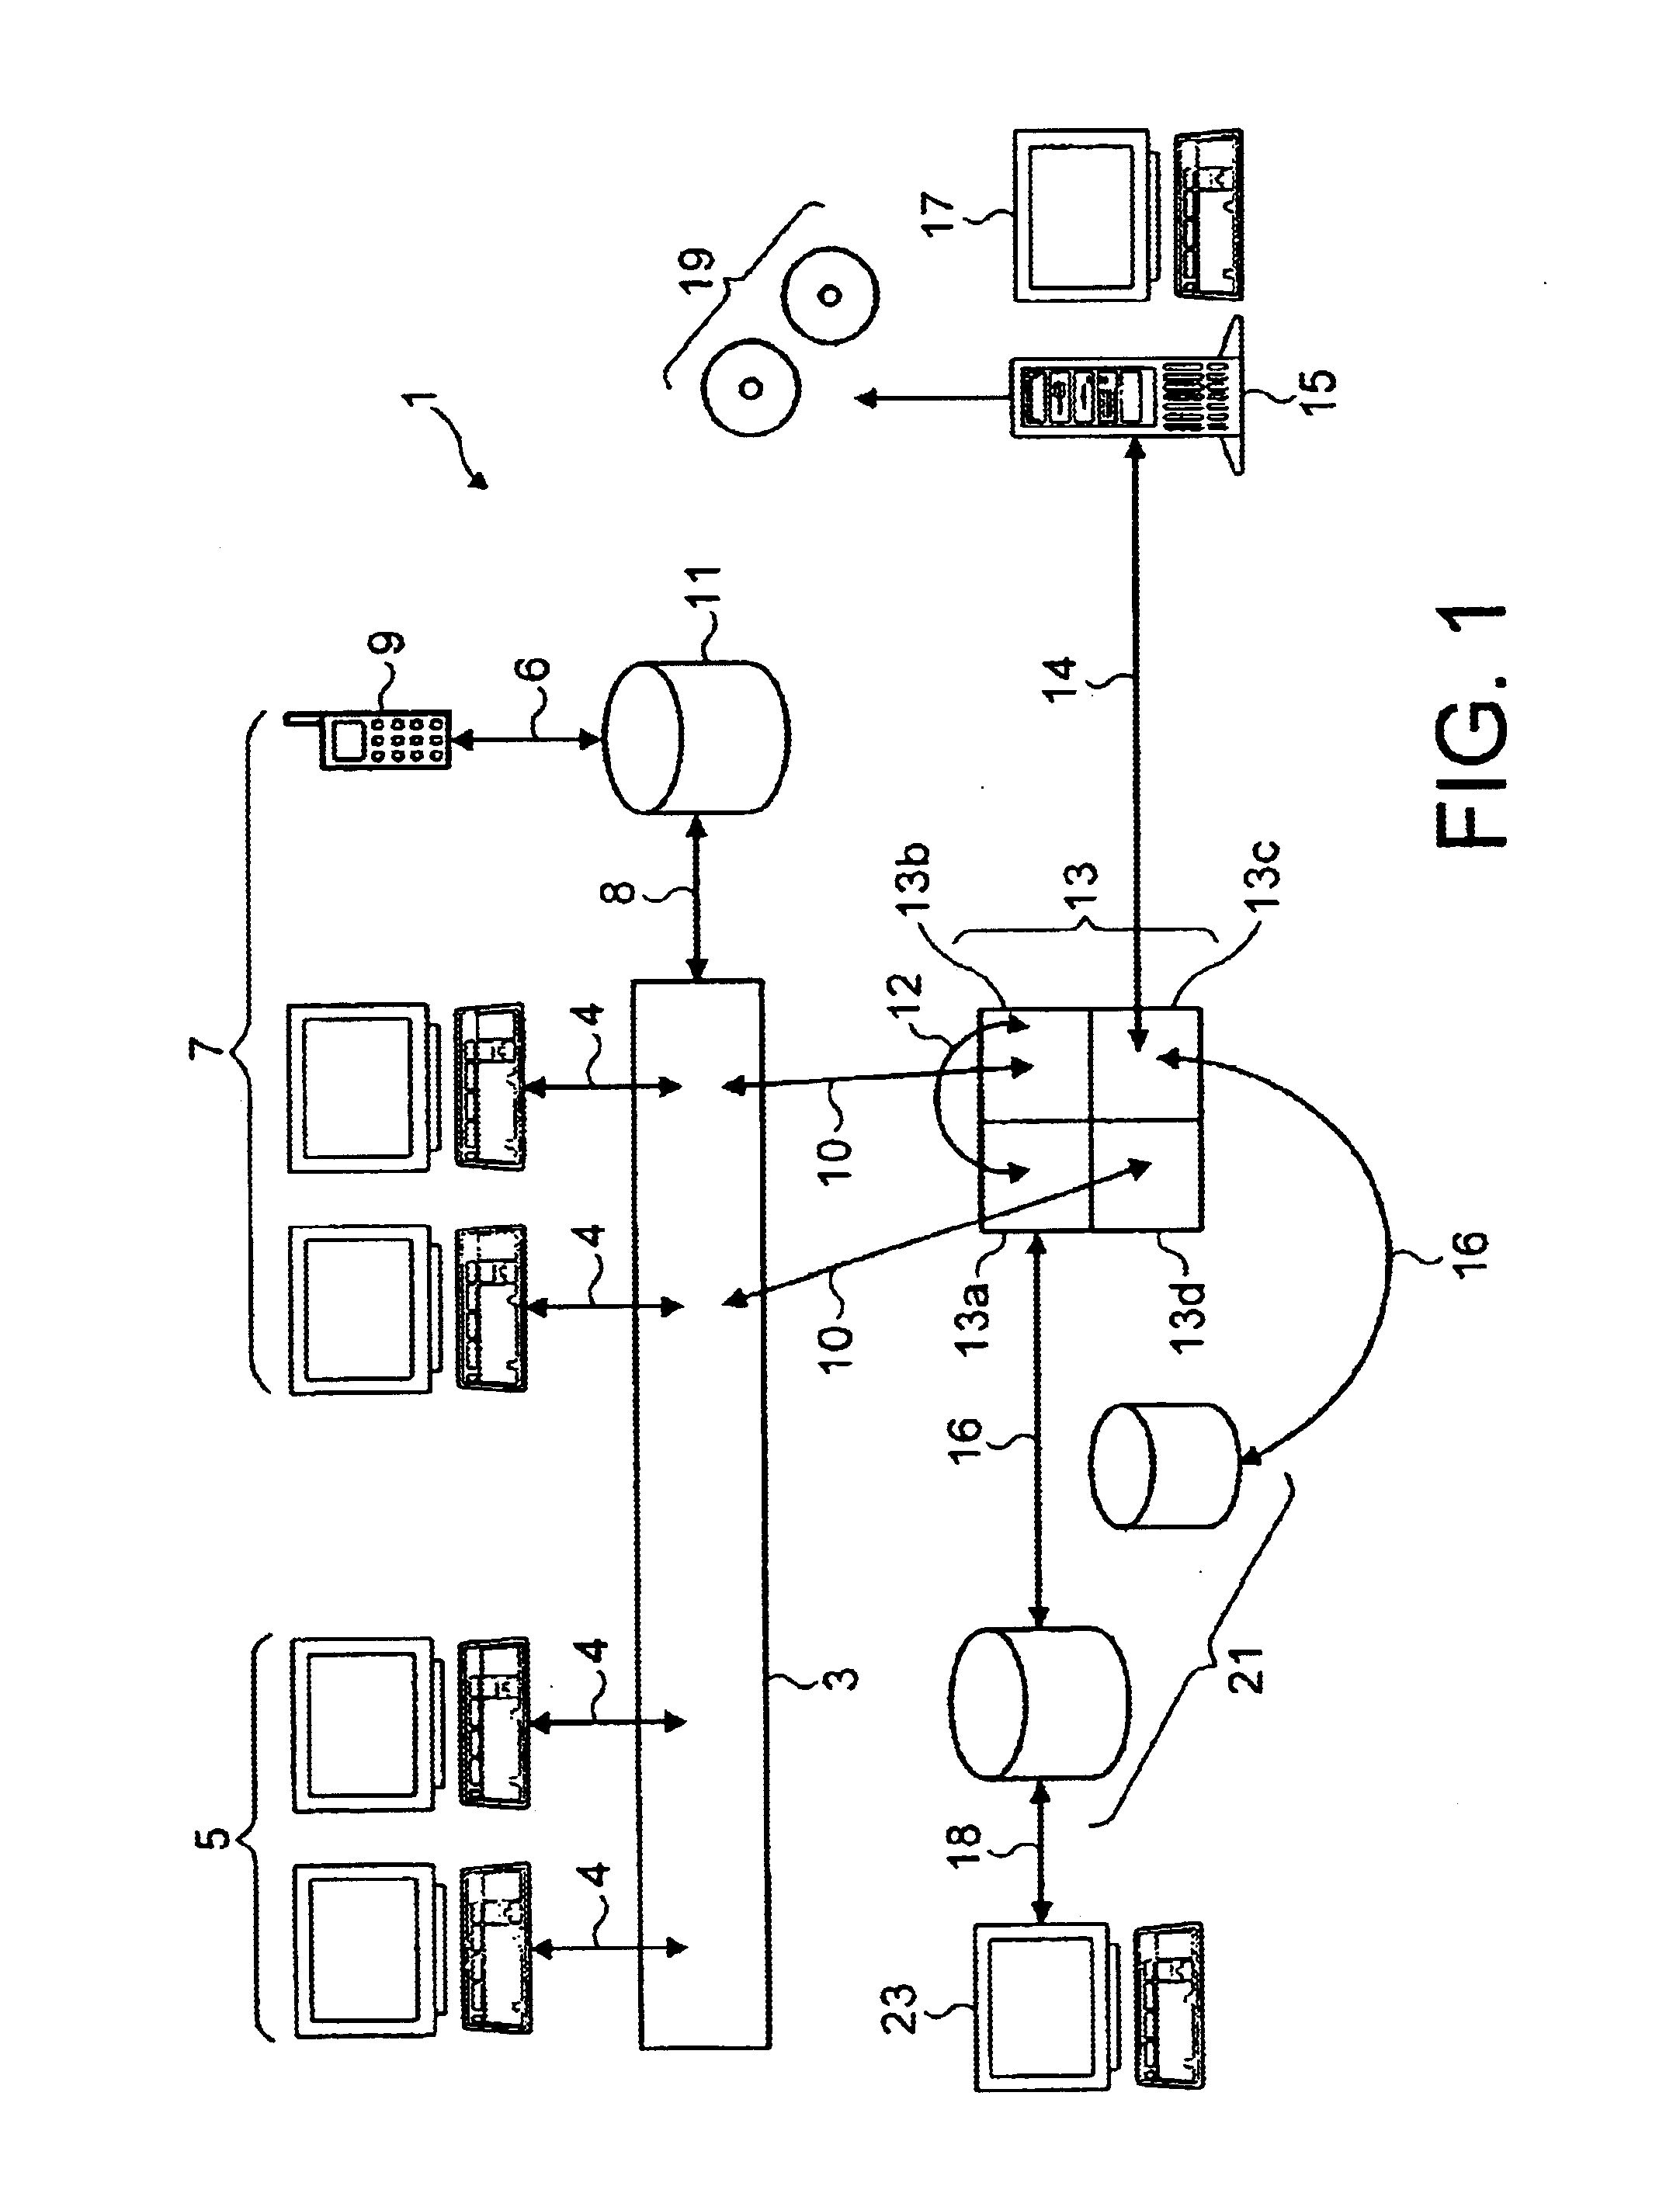 Method and apparatus for content repository with versioning and data modeling